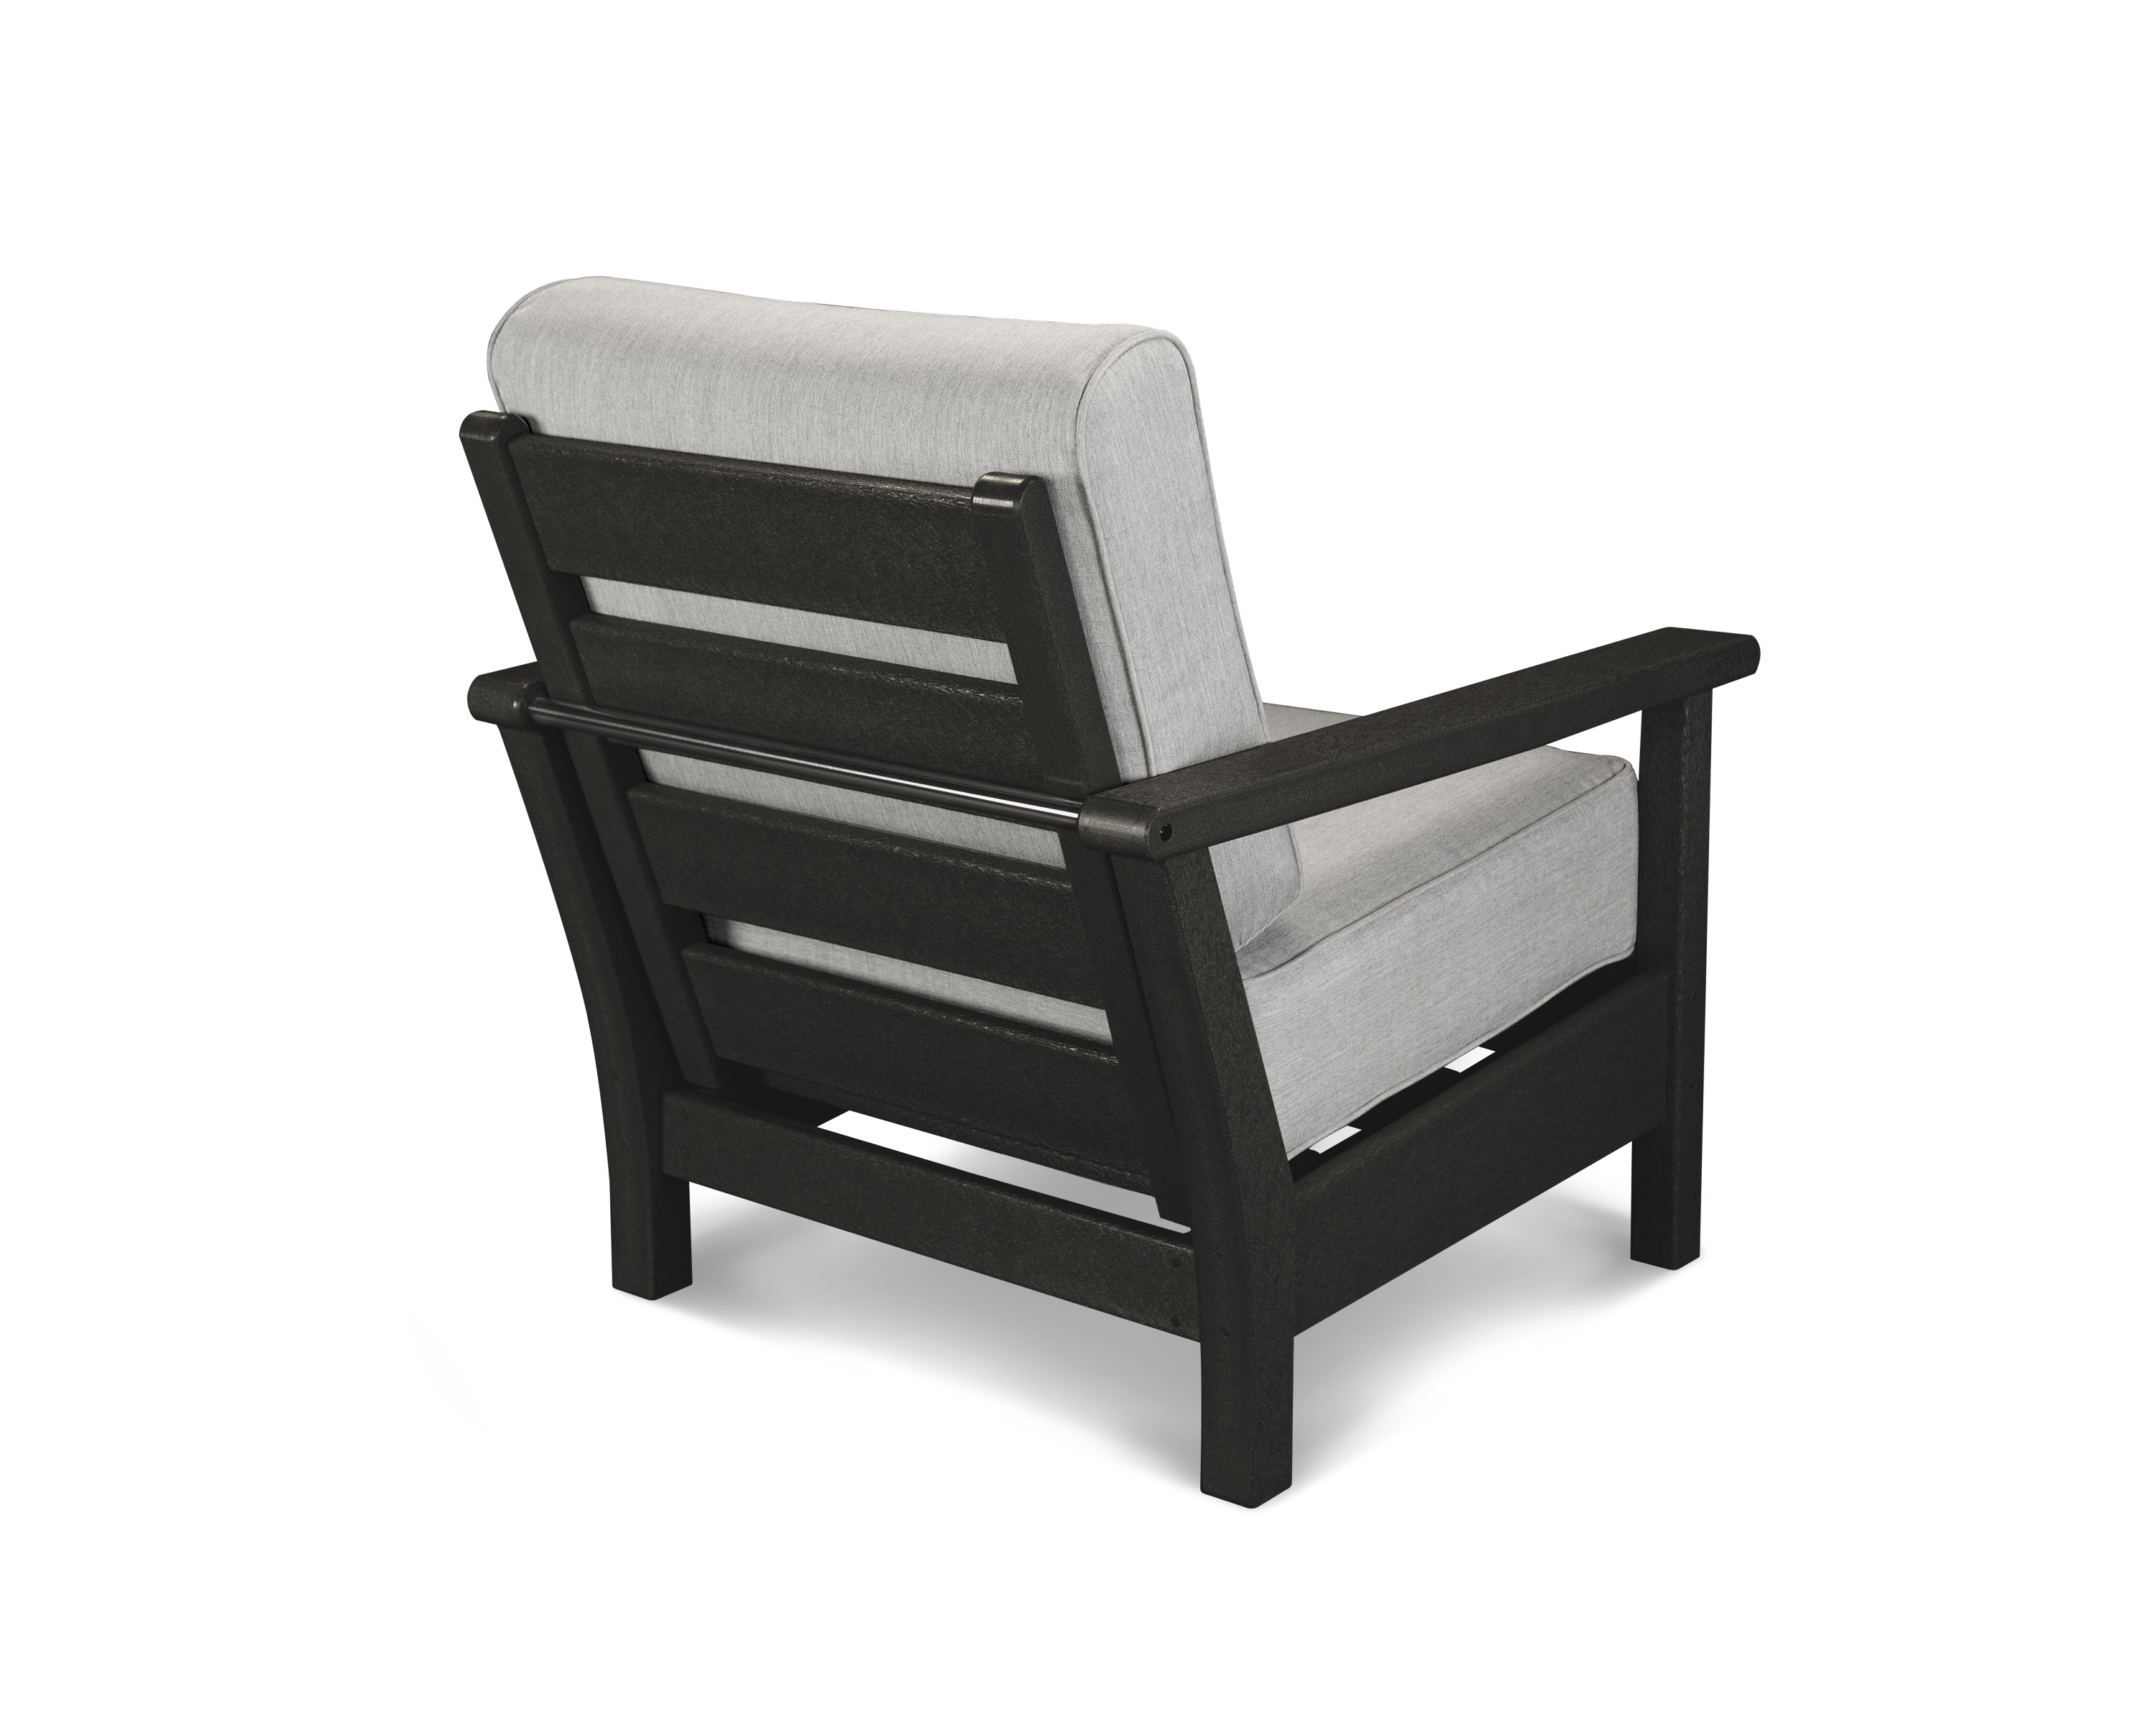 The Comfortable And Luxurious Chair You Have Been Waiting For Can Now Be A Part Of Your Outdoor Space. The Harbour Collection Chair Has Contemporary Lines That Are Matched With Maximum Comfort. All-weather Polywood